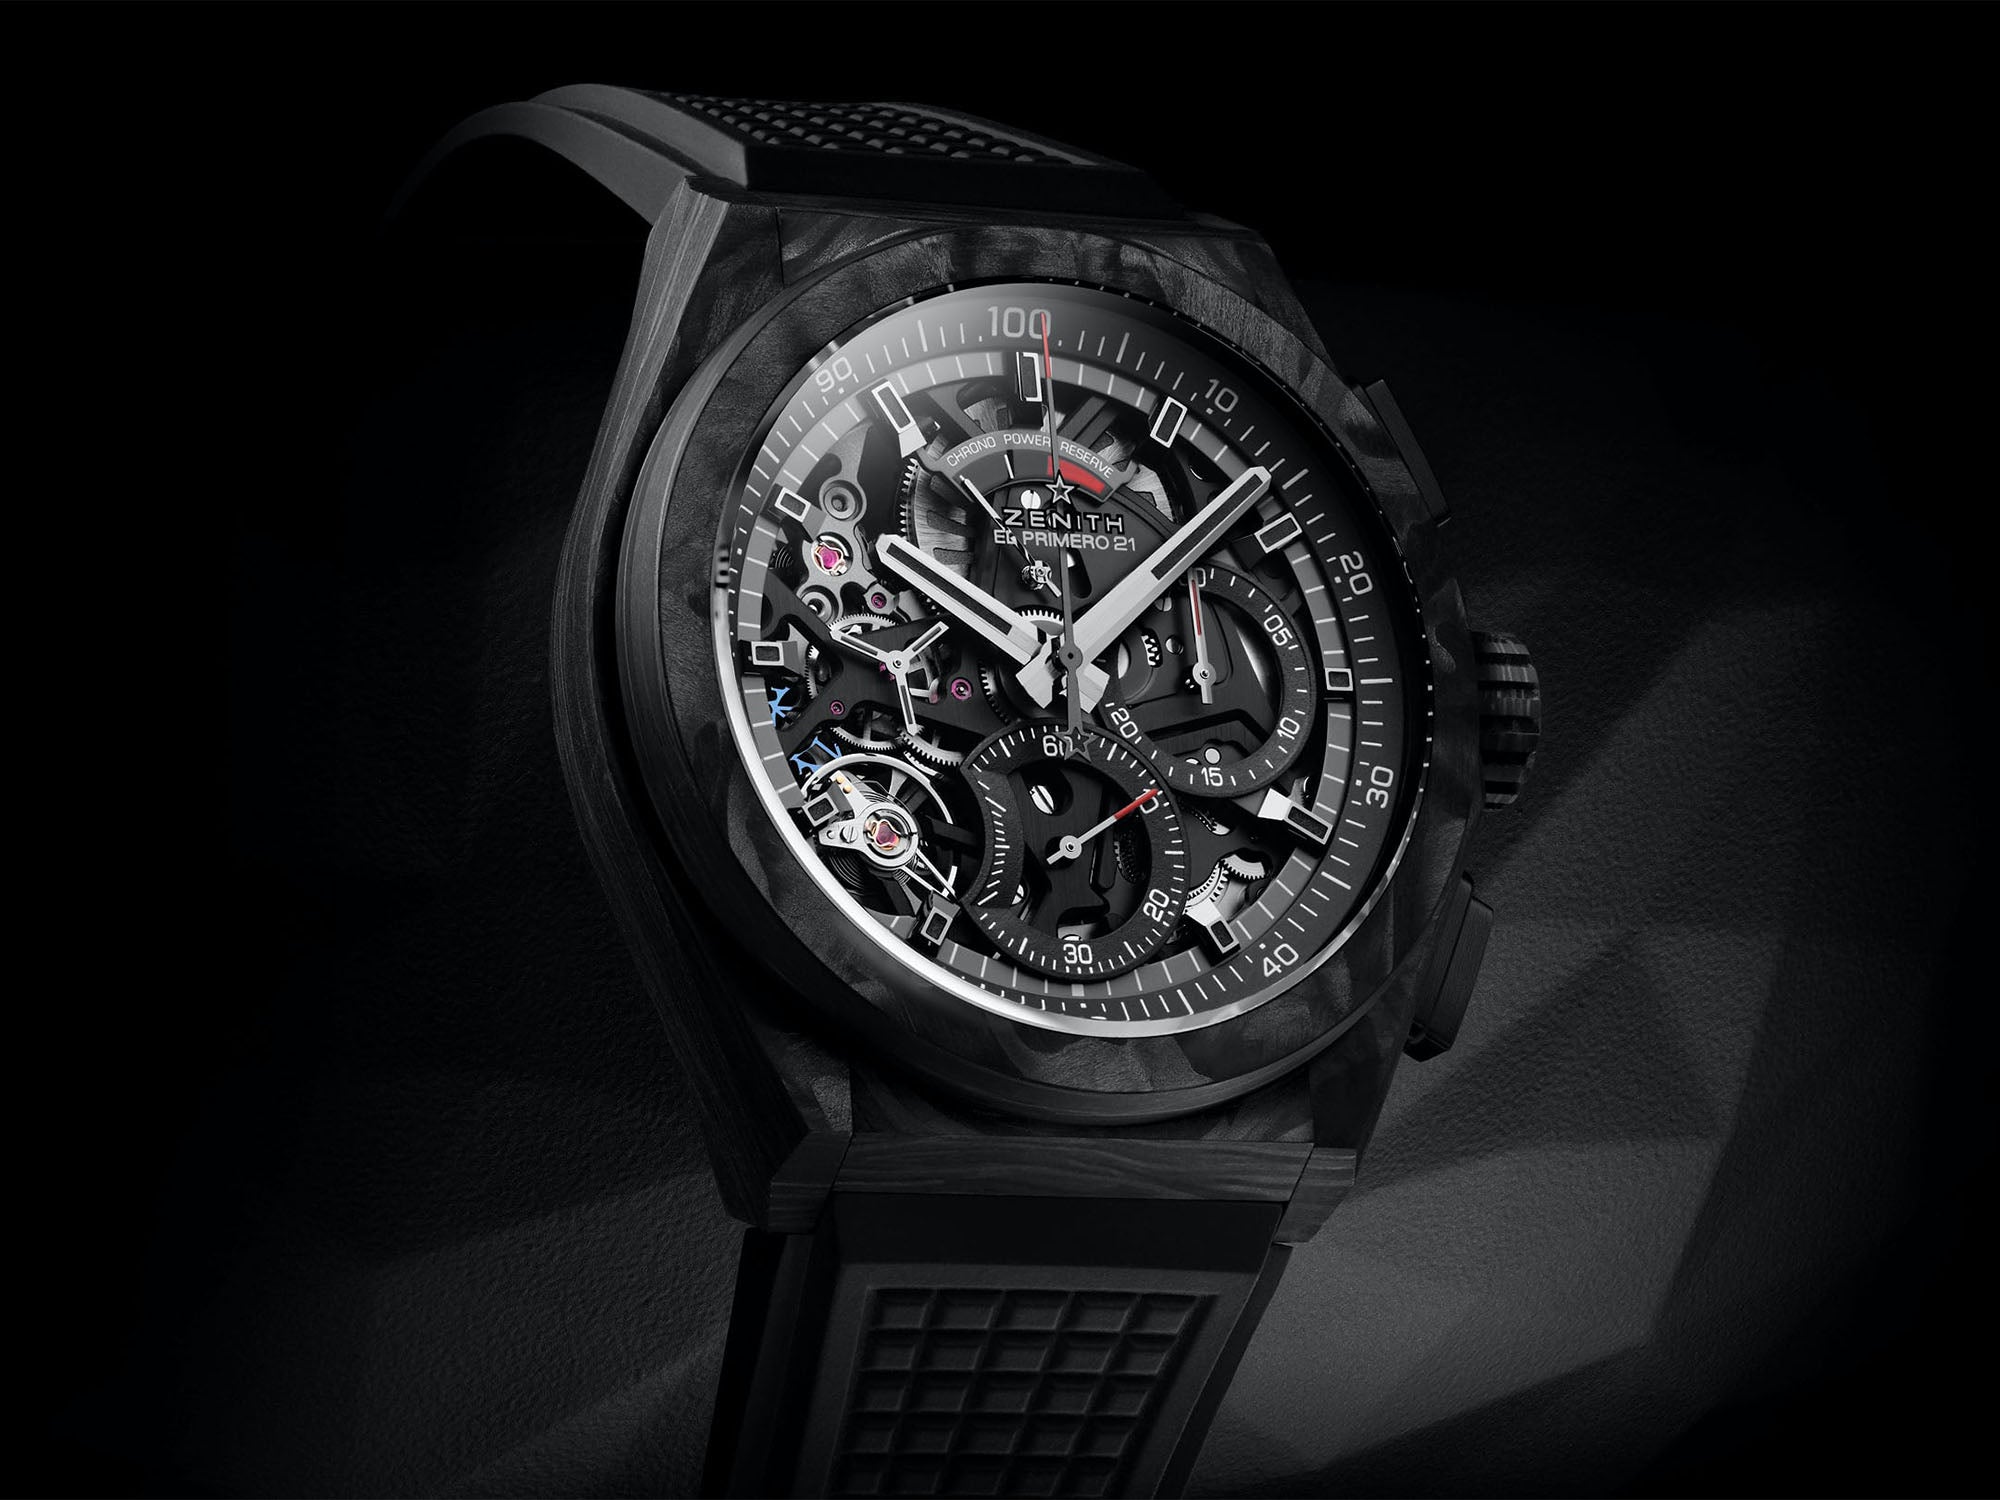 Zenith Defy Watches: A Brief History and Guide to the Current